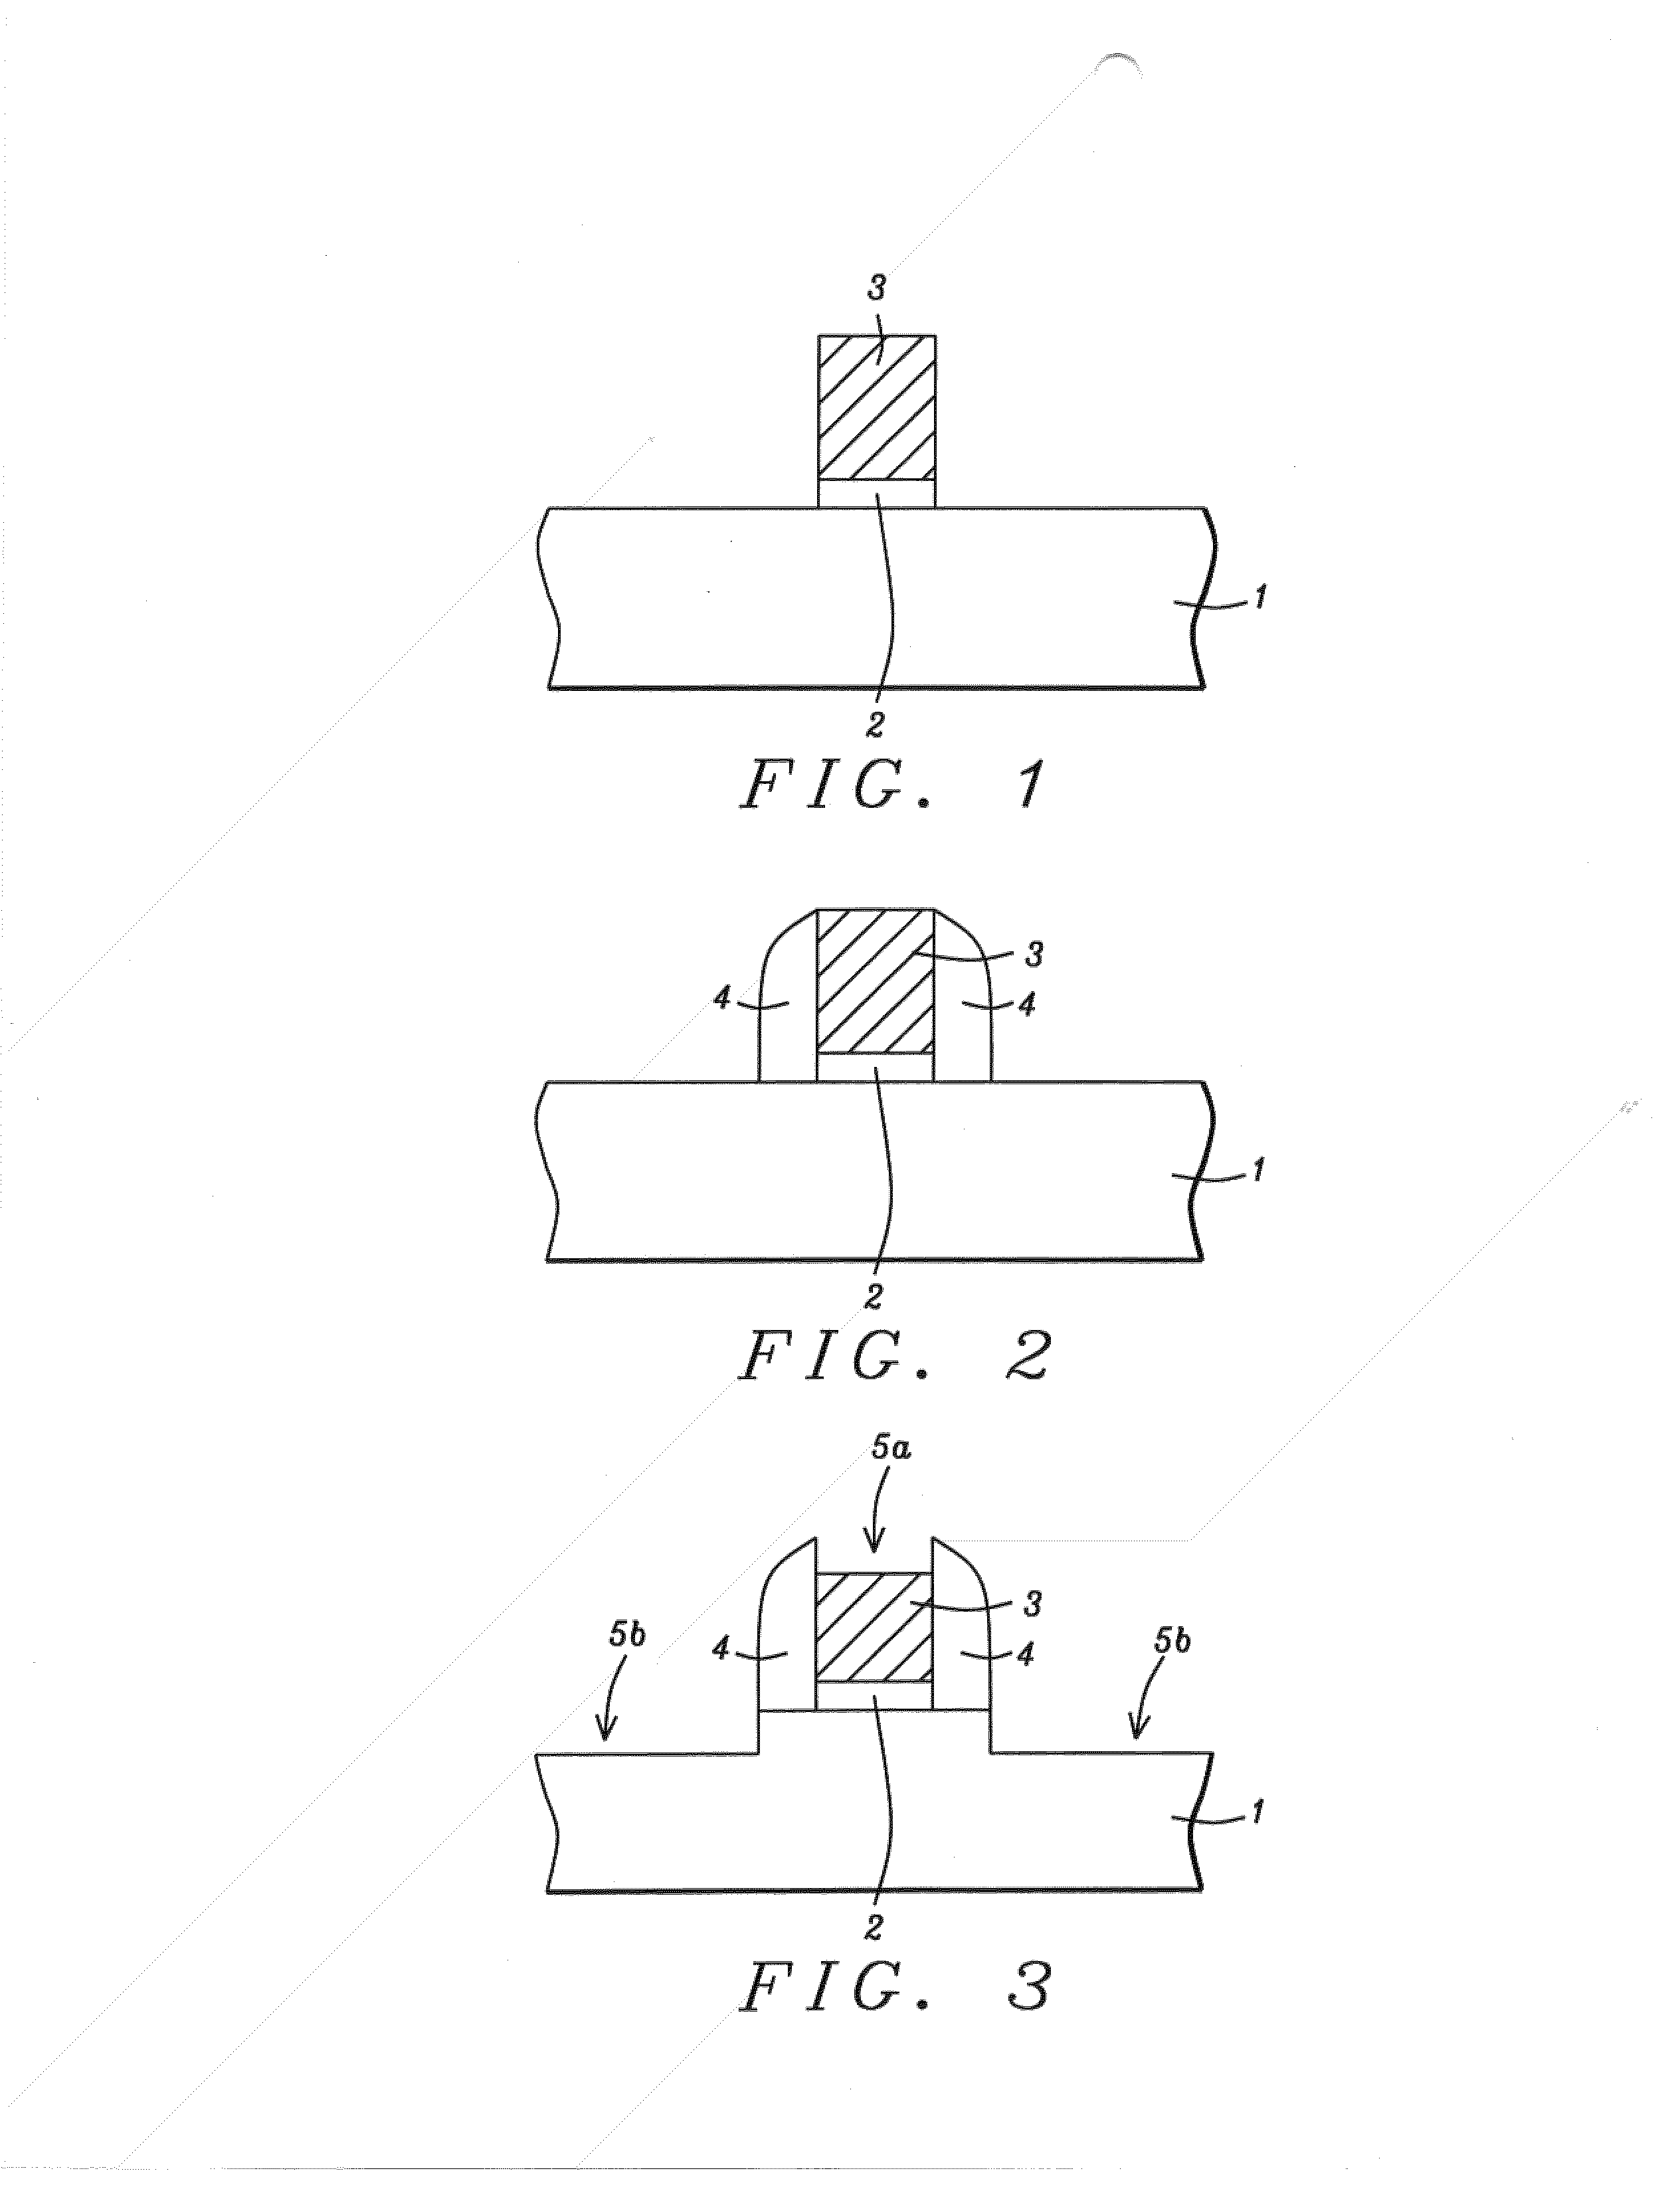 A Recessed Polysilicon Gate Structure for a Strained Silicon MOSFET Device